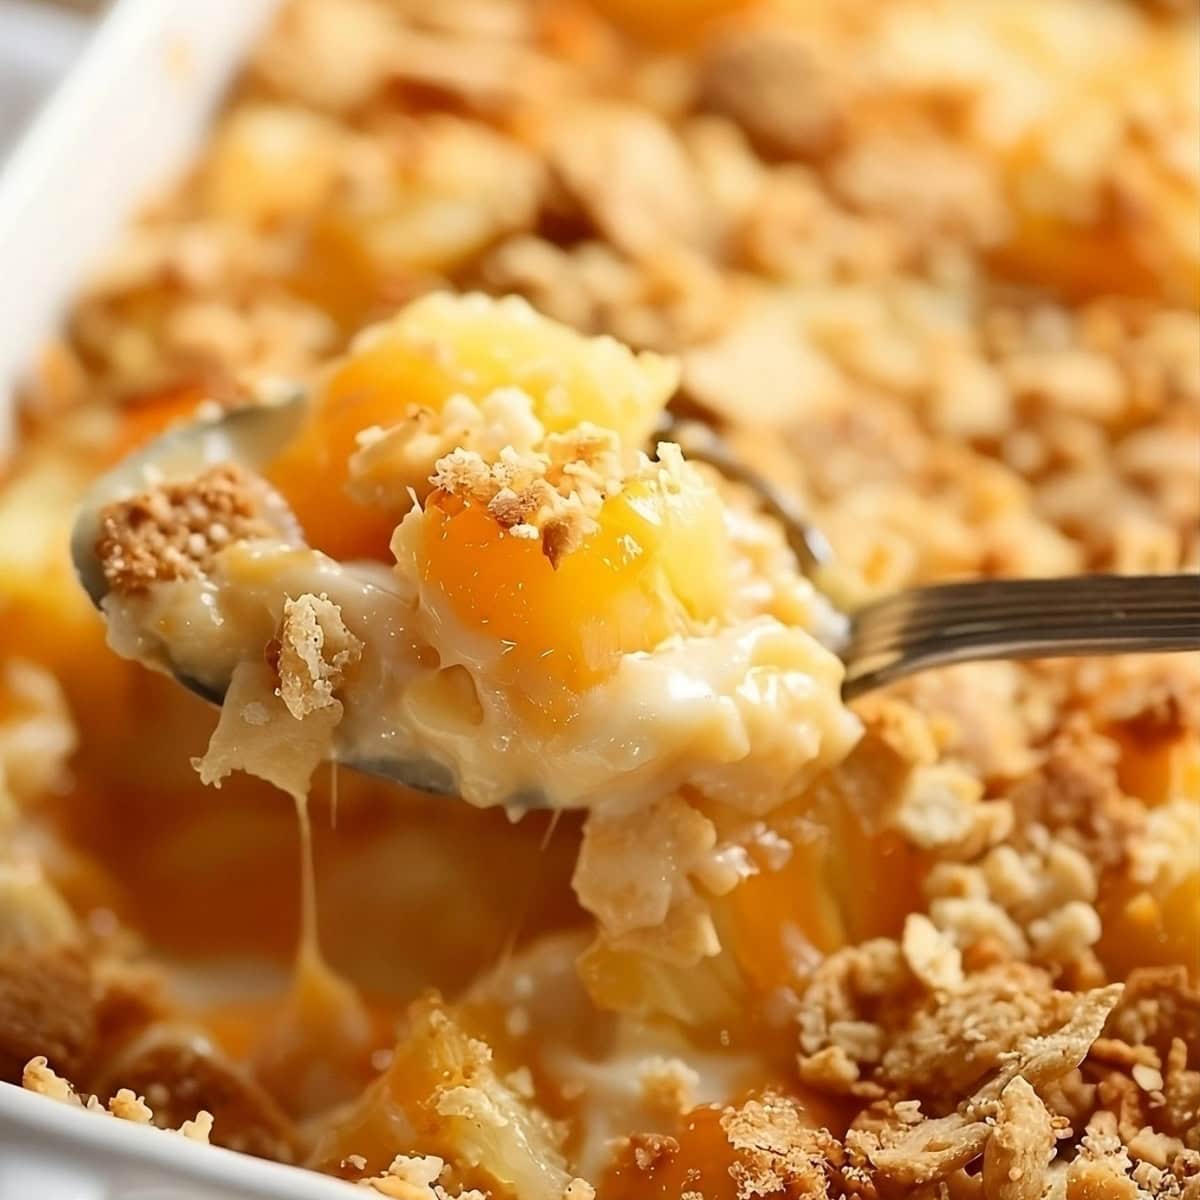 Spoonful of pineapple cheese casserole from a baking dish.